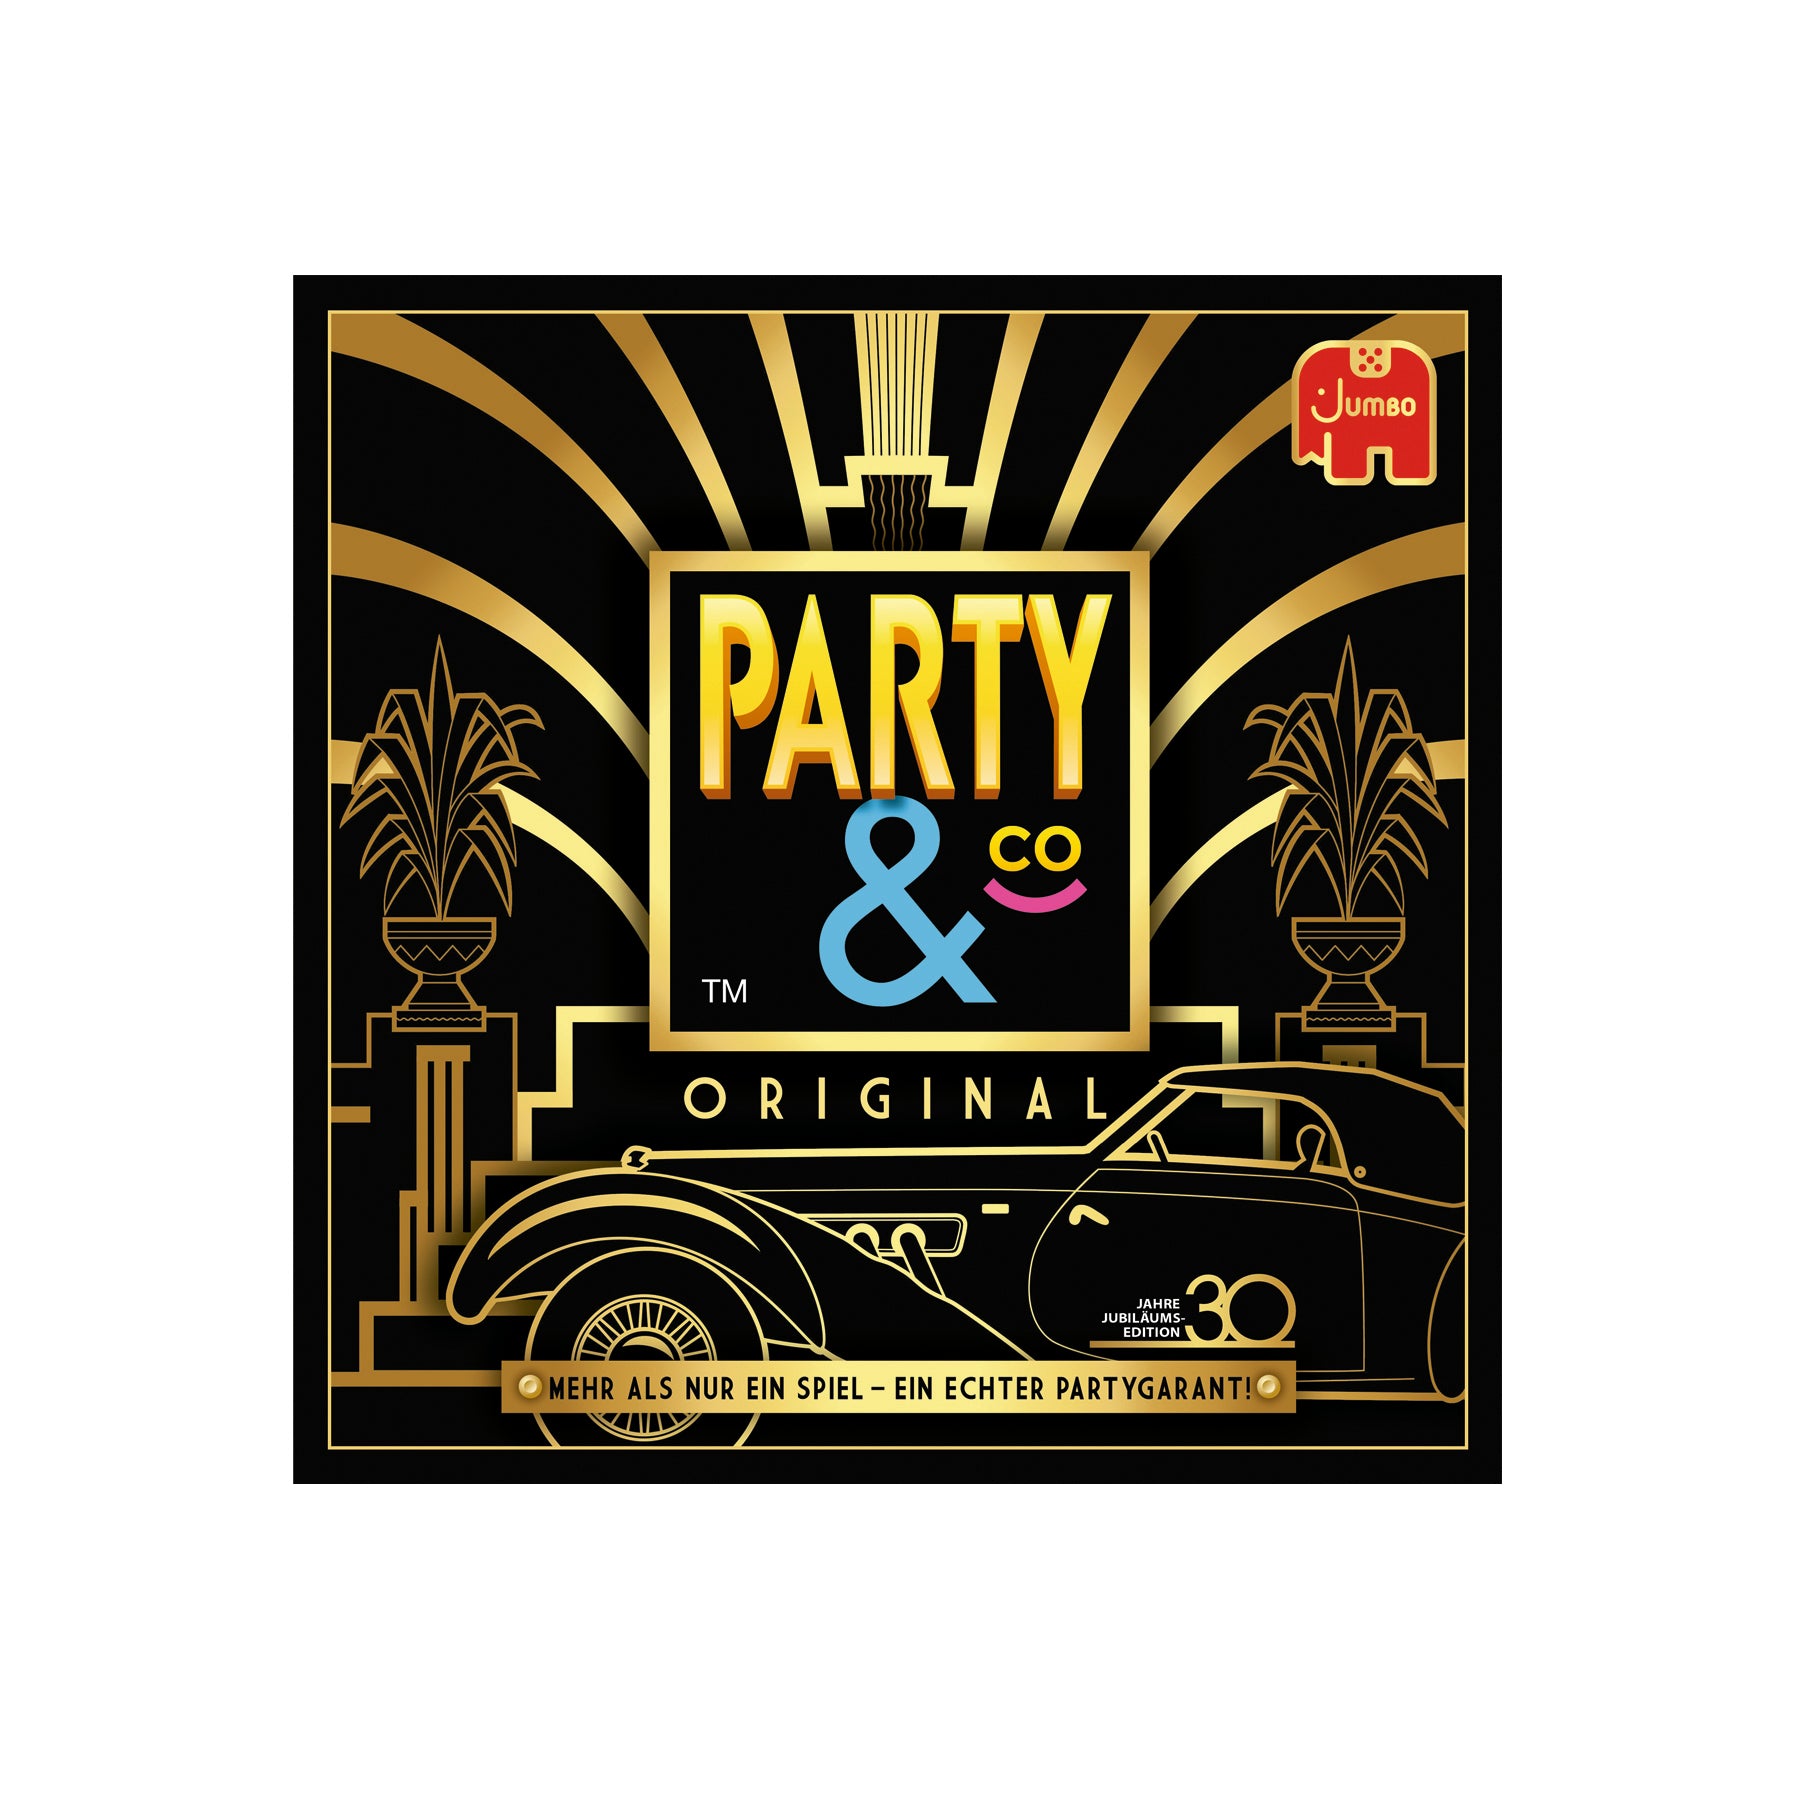 Party&Co Original 30th aniversary - DACH - product image - Jumboplay.com